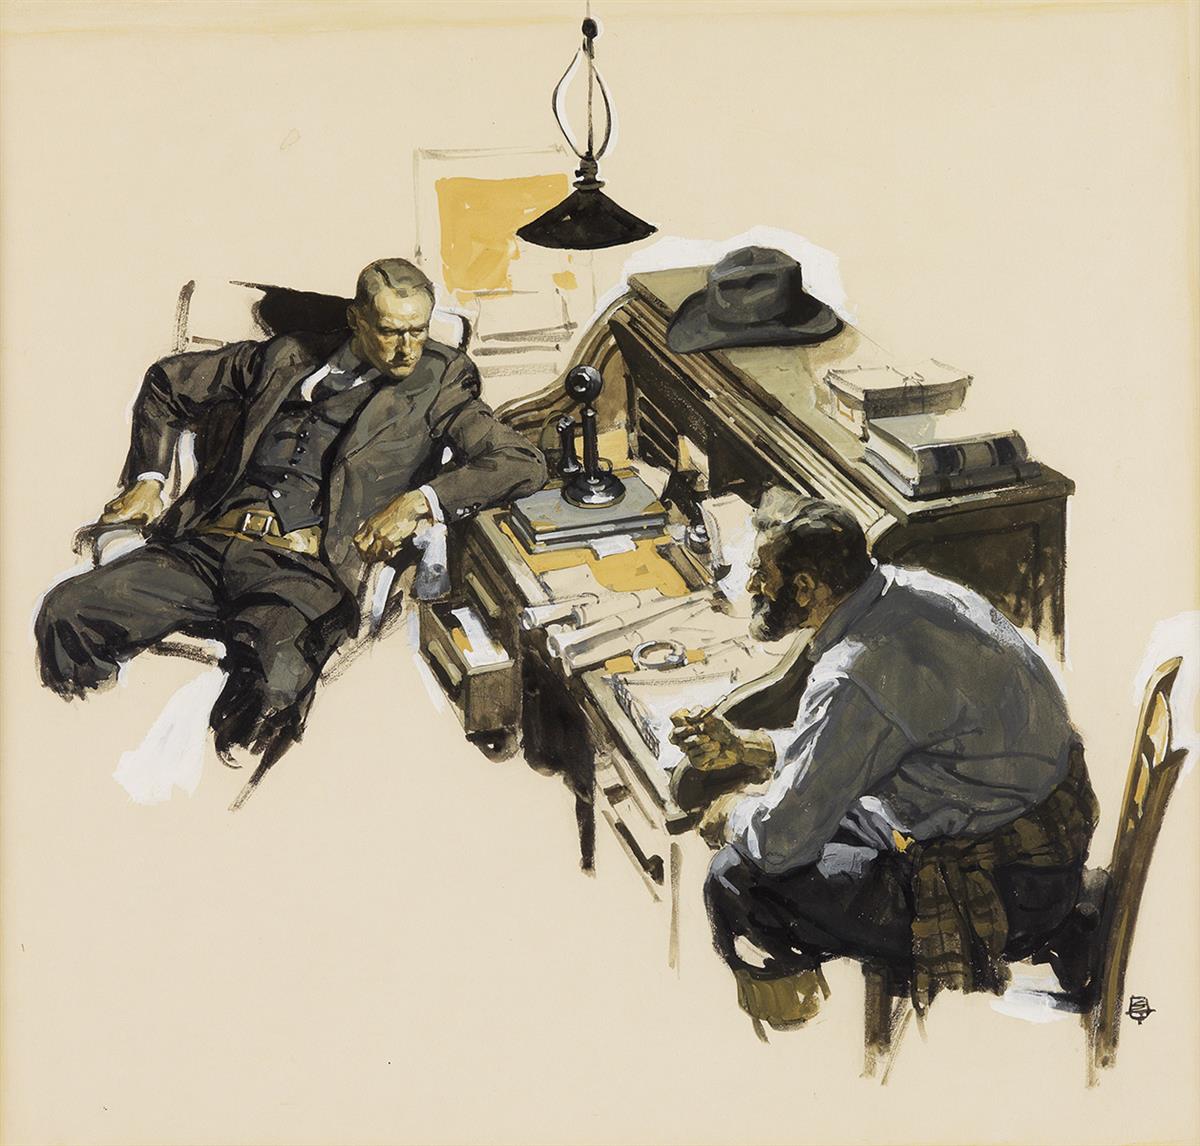 SAUL TEPPER. The Spoilers.